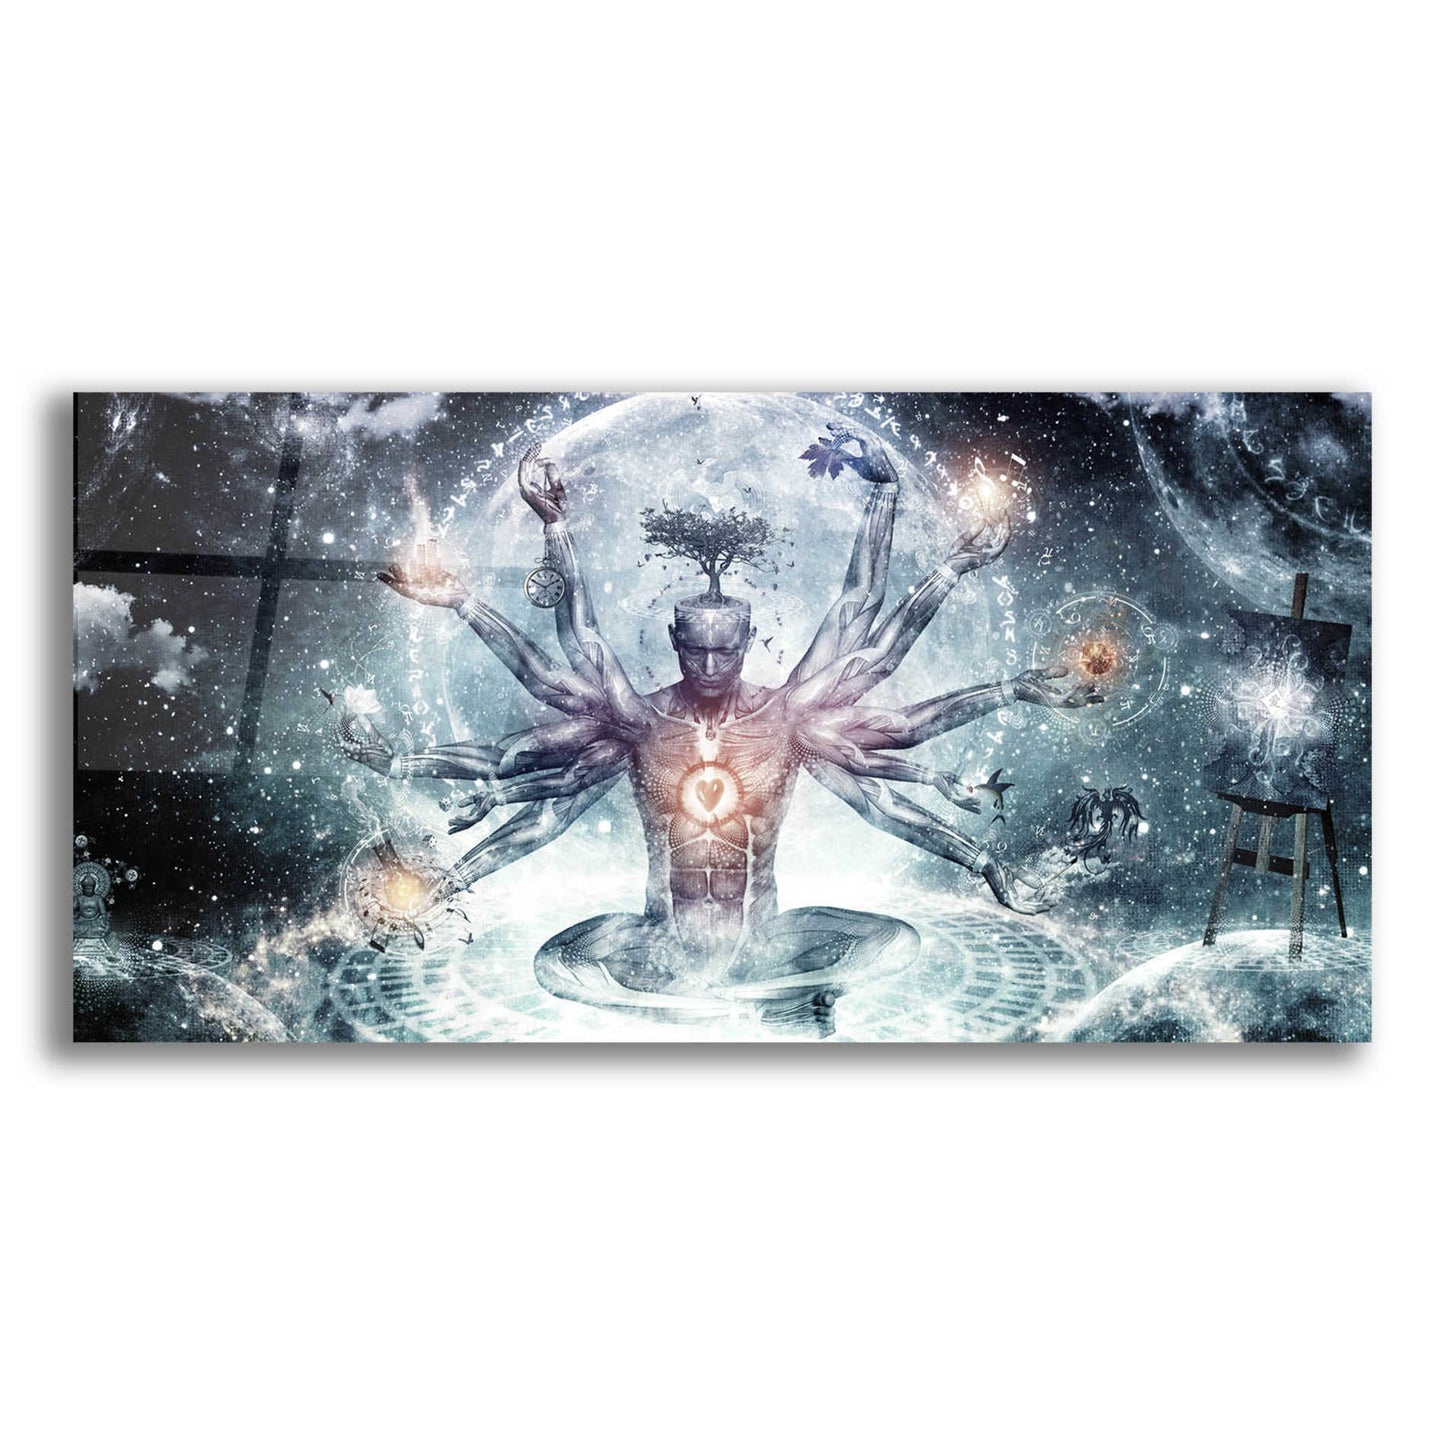 Epic Art 'The Neverending Dreamer' by Cameron Gray, Acrylic Glass Wall Art,24x12